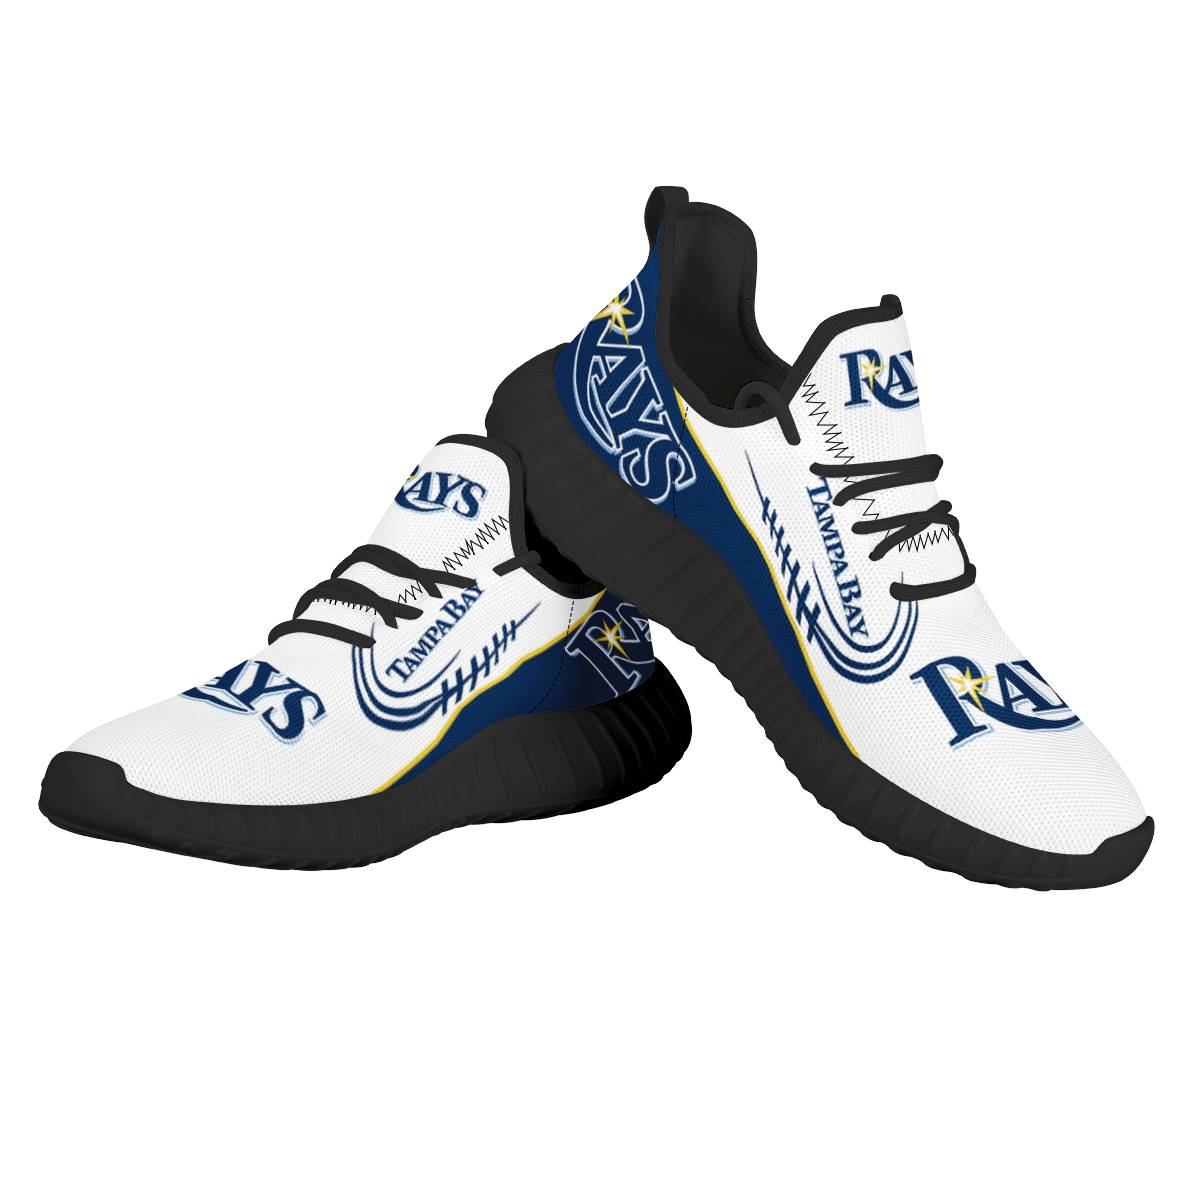 Men's Tampa Bay Rays Mesh Knit Sneakers/Shoes 004